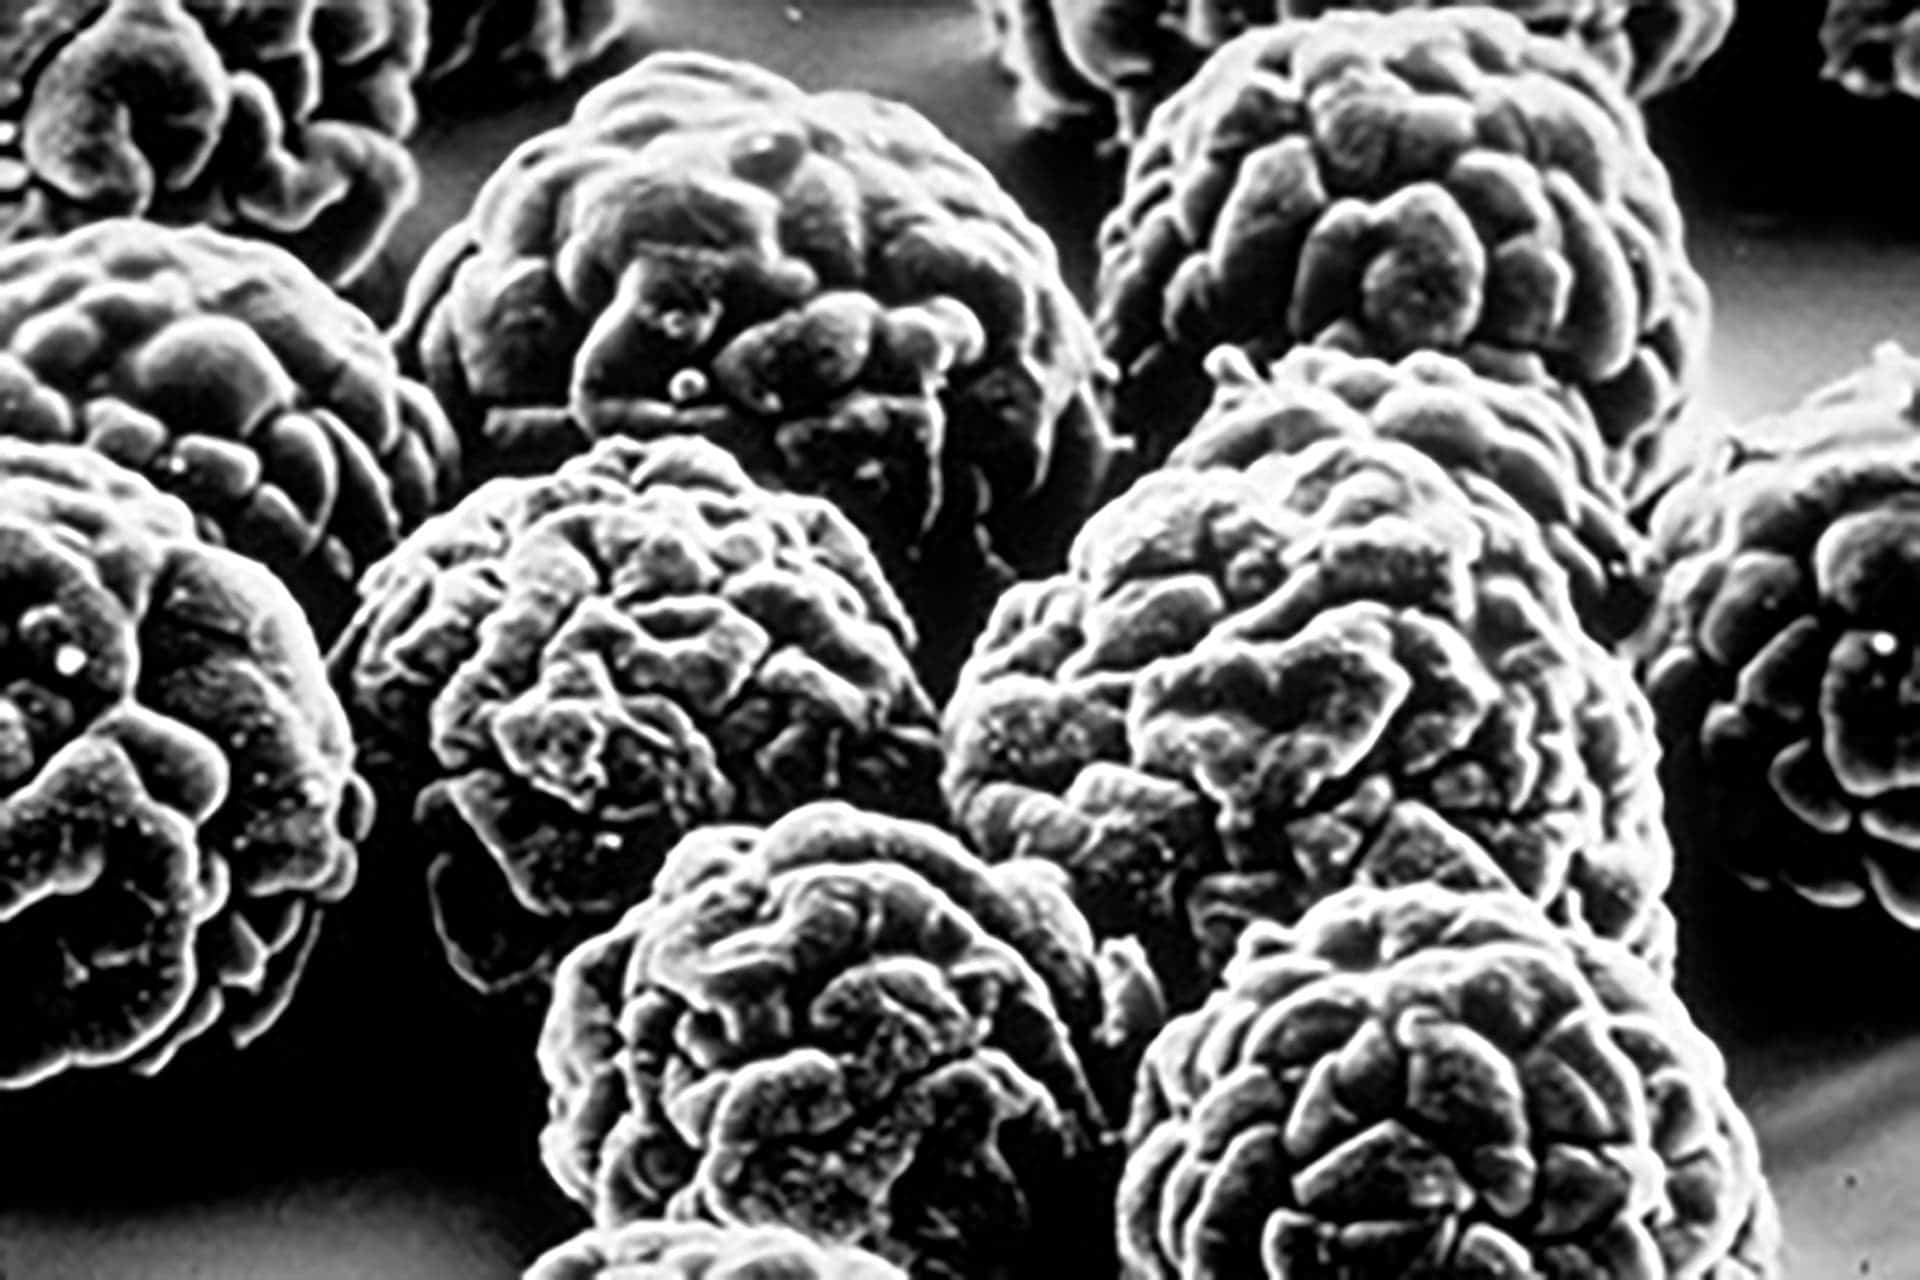 The wild poliovirus as seen through a scan electron microscope. The virus invades the nervous system, causing paralysis in one out of every 200 children. Credit: Polio Eradication.